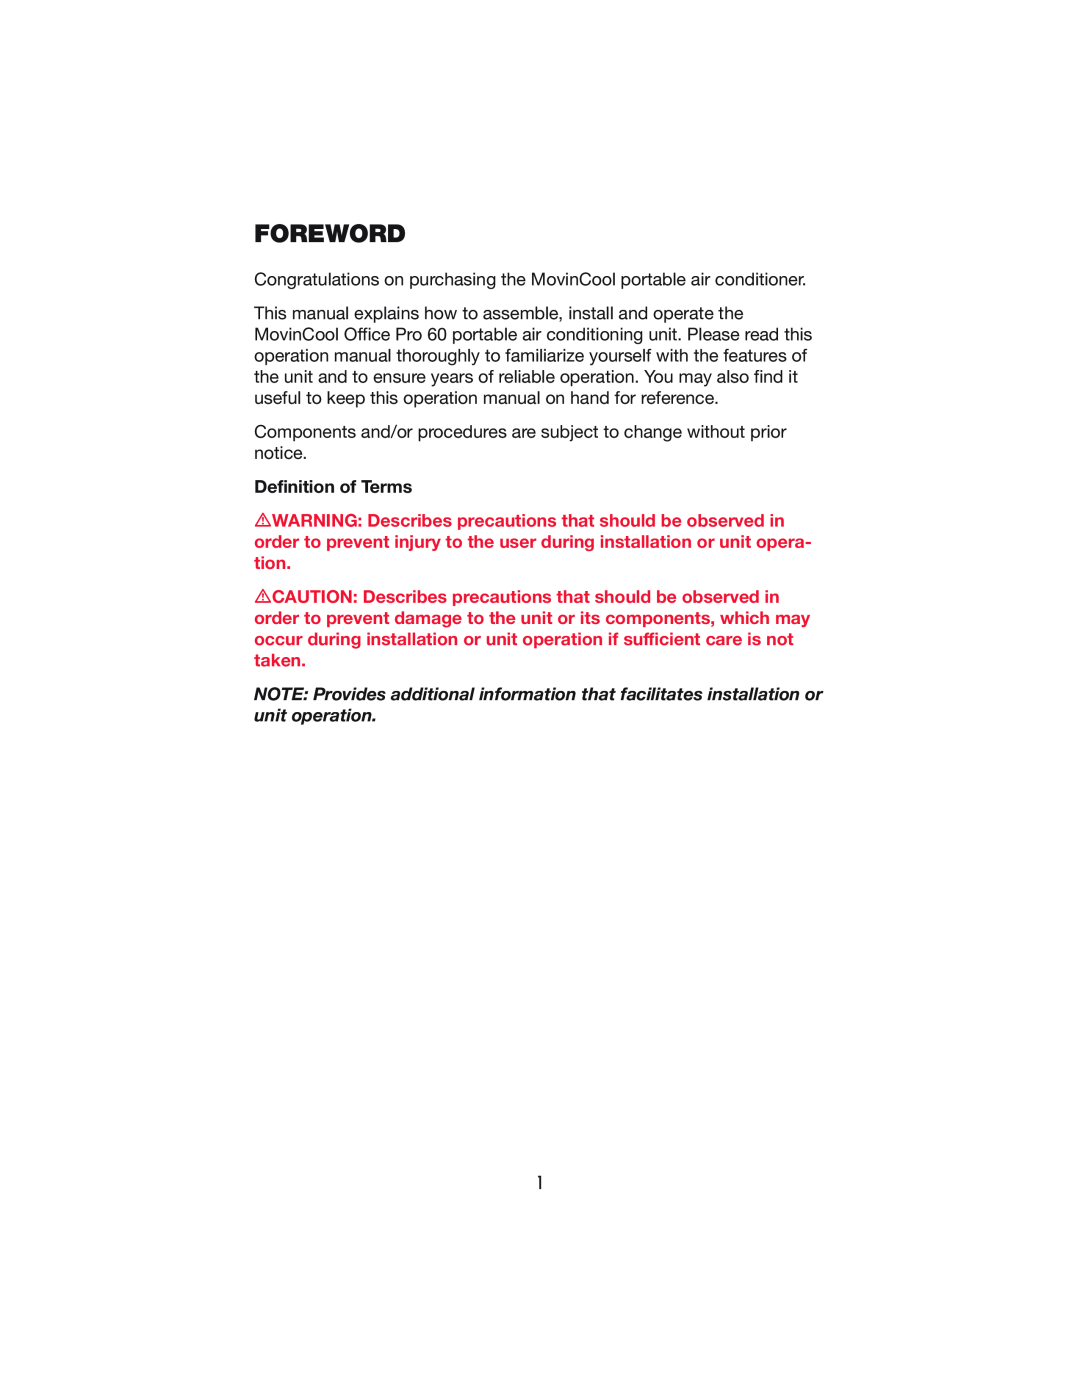 Denso PRO 60 operation manual Foreword, Definition of Terms 